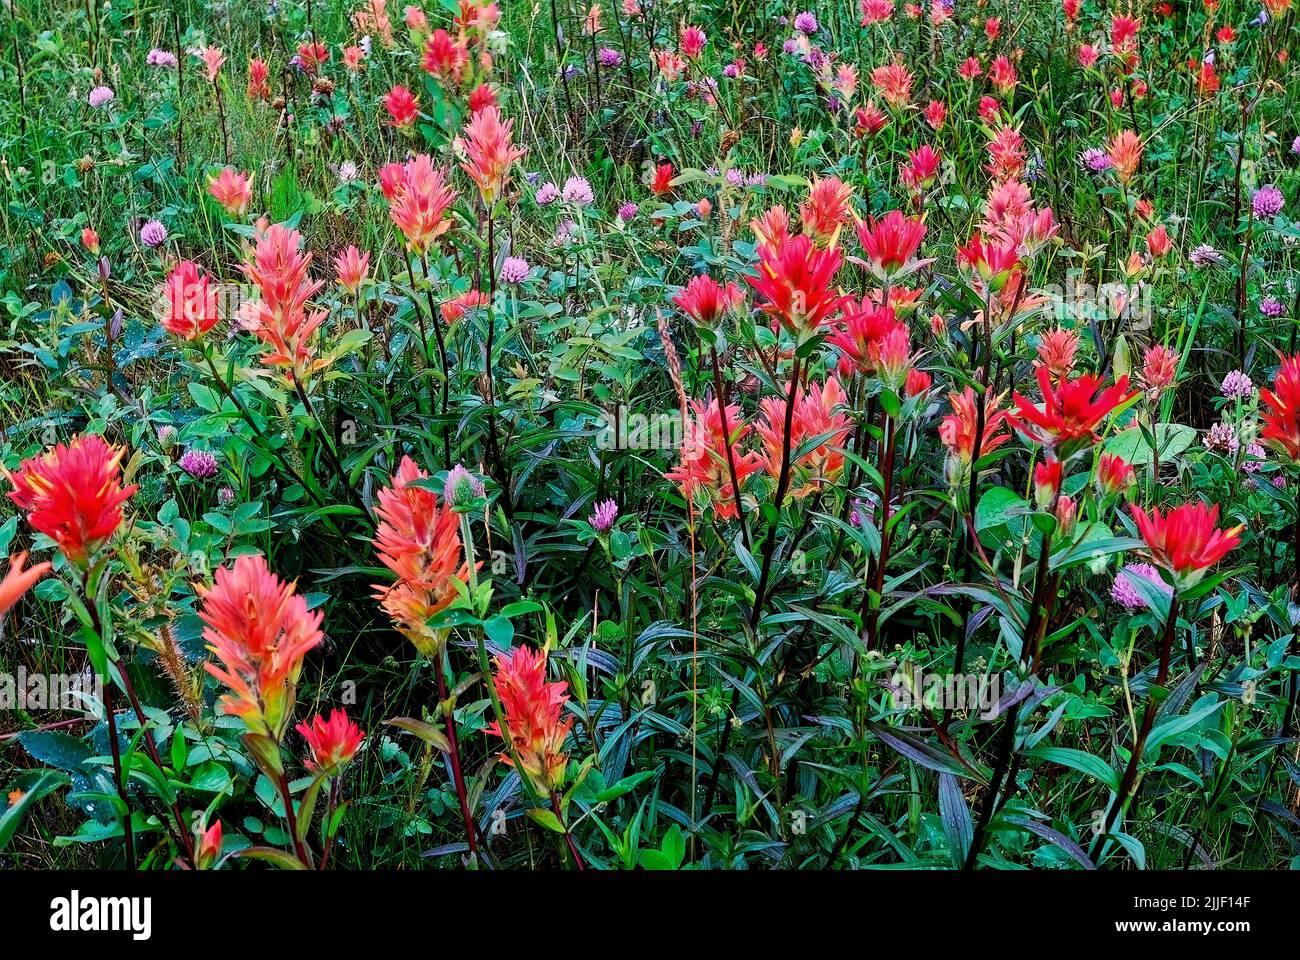 A rural meadow full of Indian paintbrush flowers growing wild in rural Alberta Canada Stock Photo